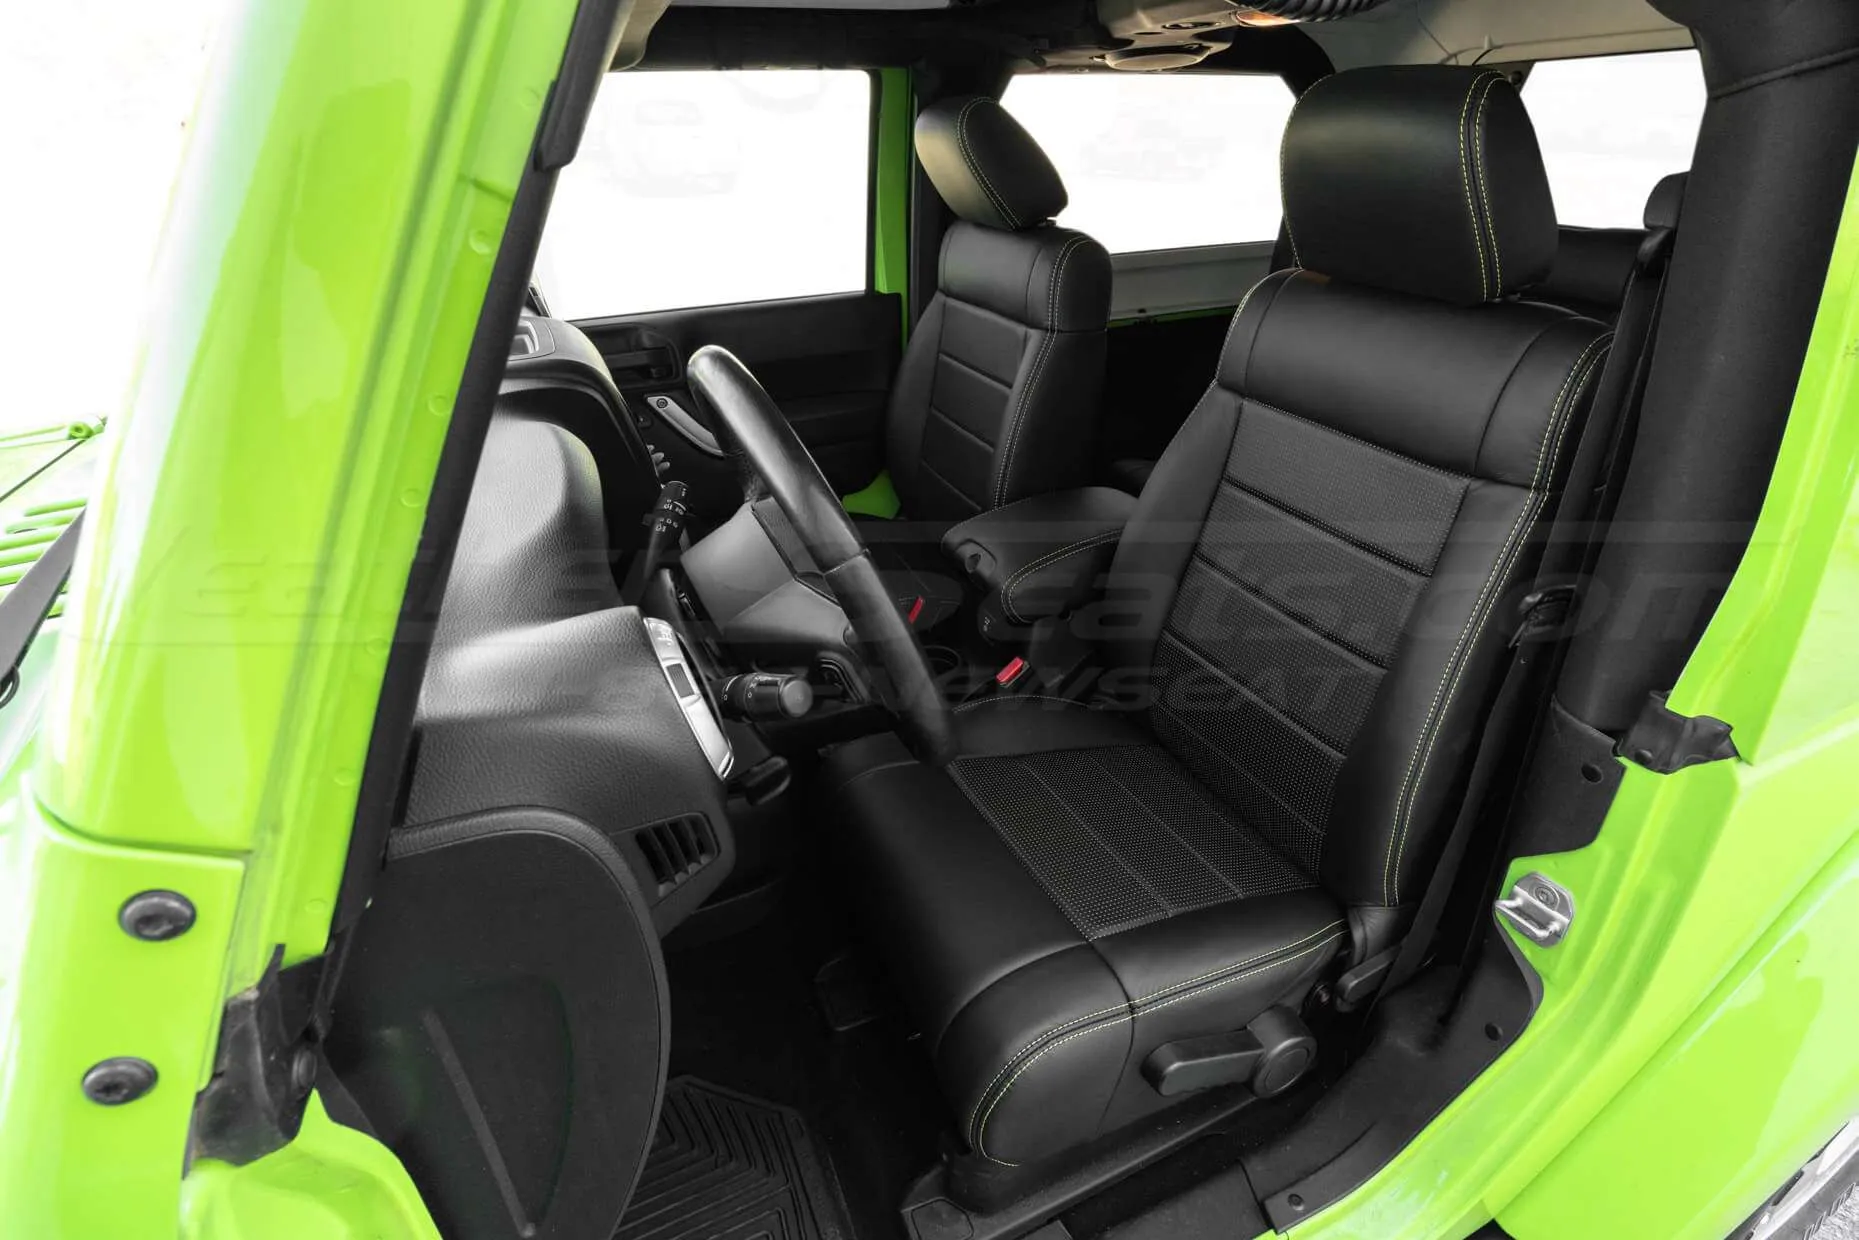 2011-2012 Jeep Wrangler JK with custom installed leather seats - Black & Piazza Green